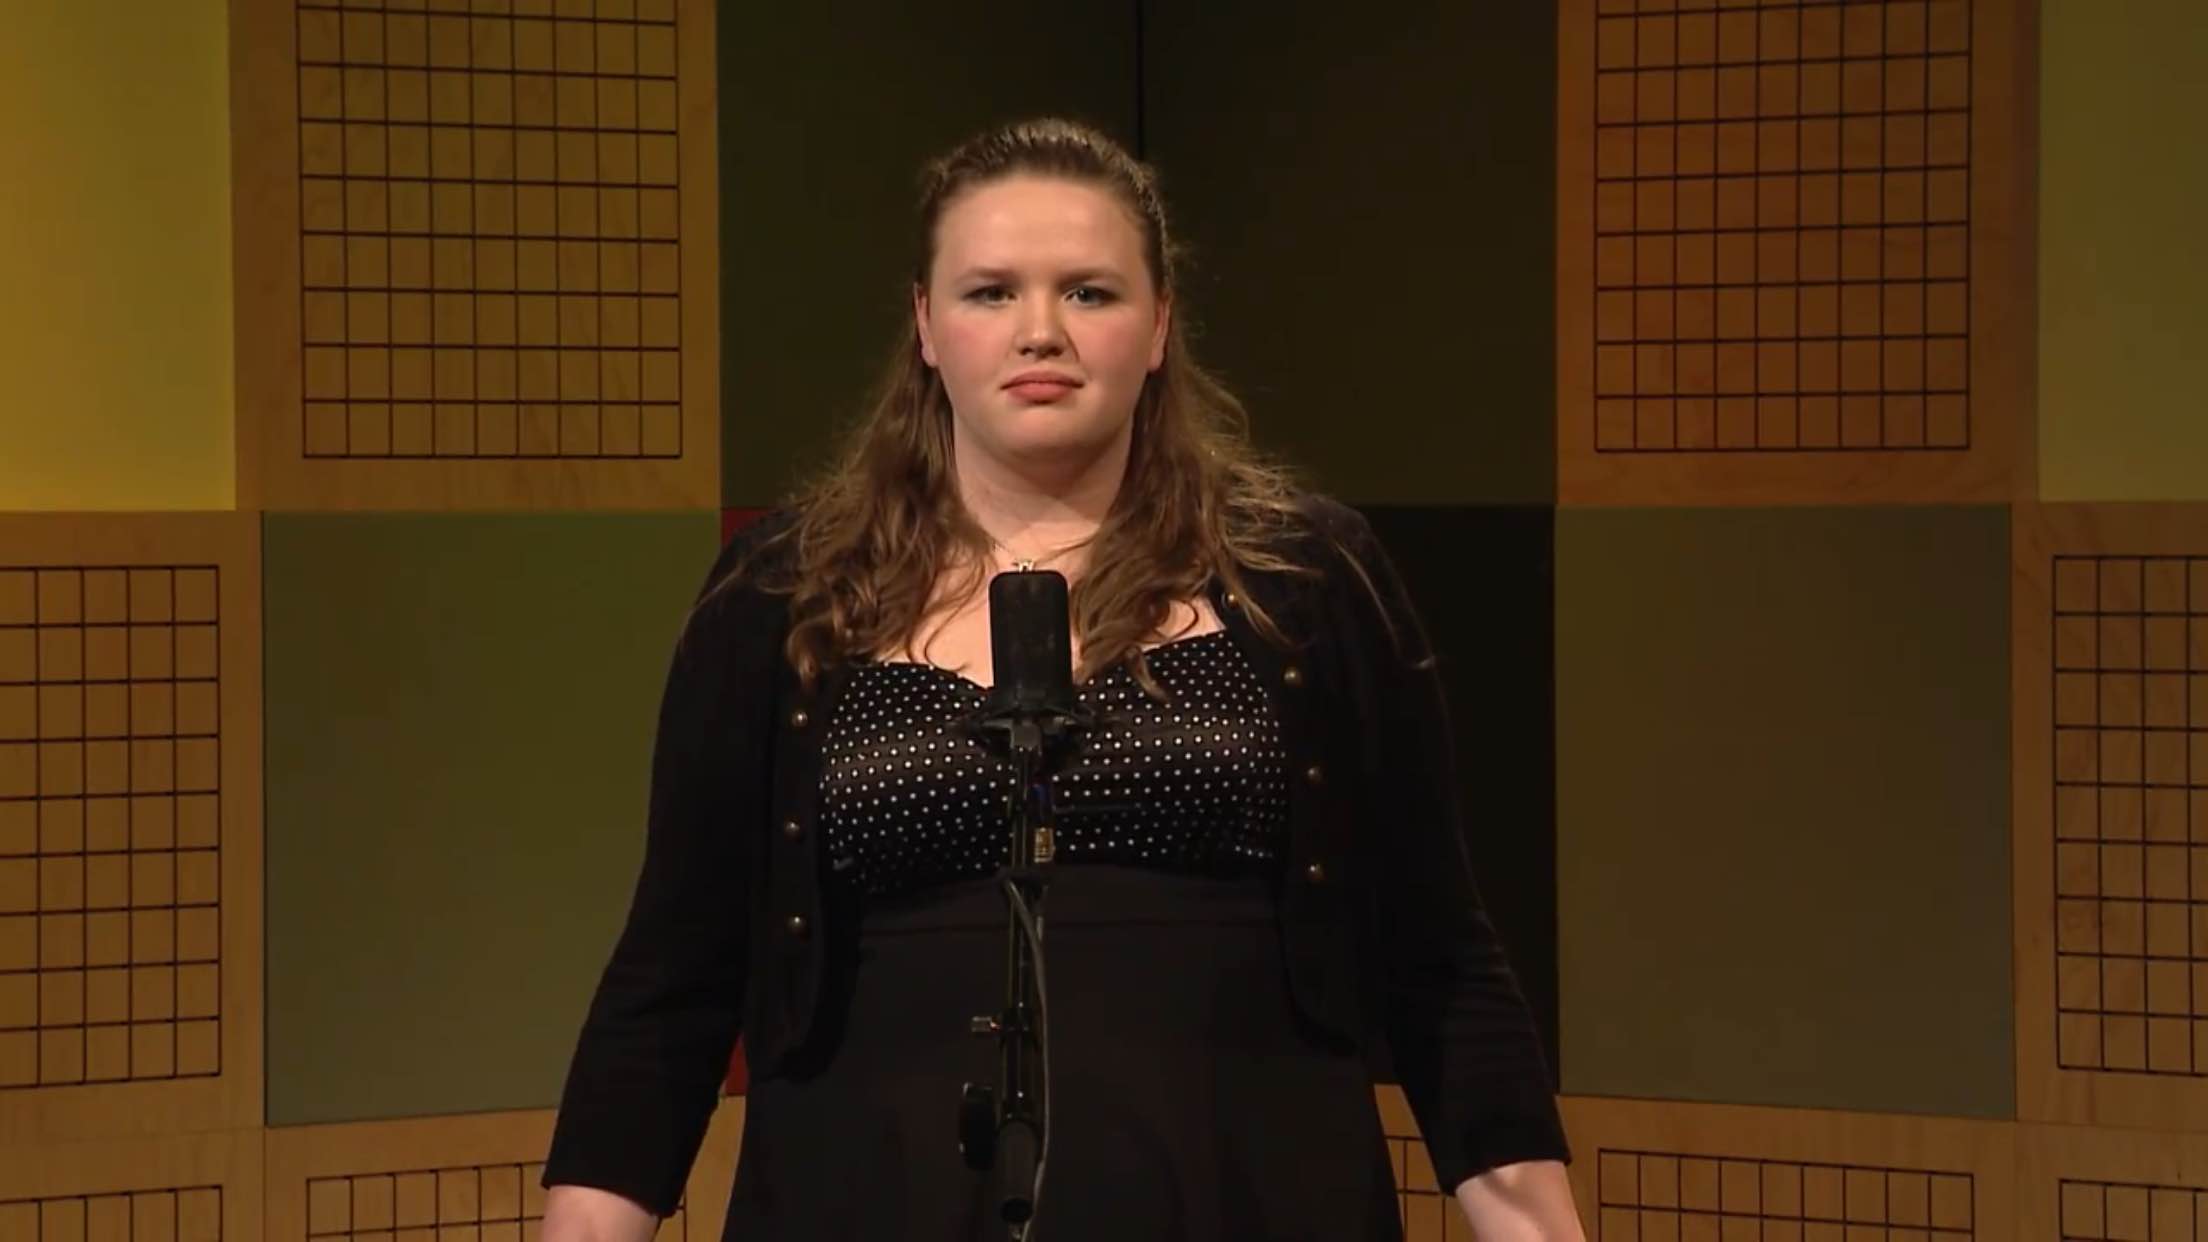 West High School student Shannon Croft recites the poem “When I Have Fears That I May Cease to Be.” at the 2016 State Poetry Out Loud Competition (Photo: YouTube screenshot)